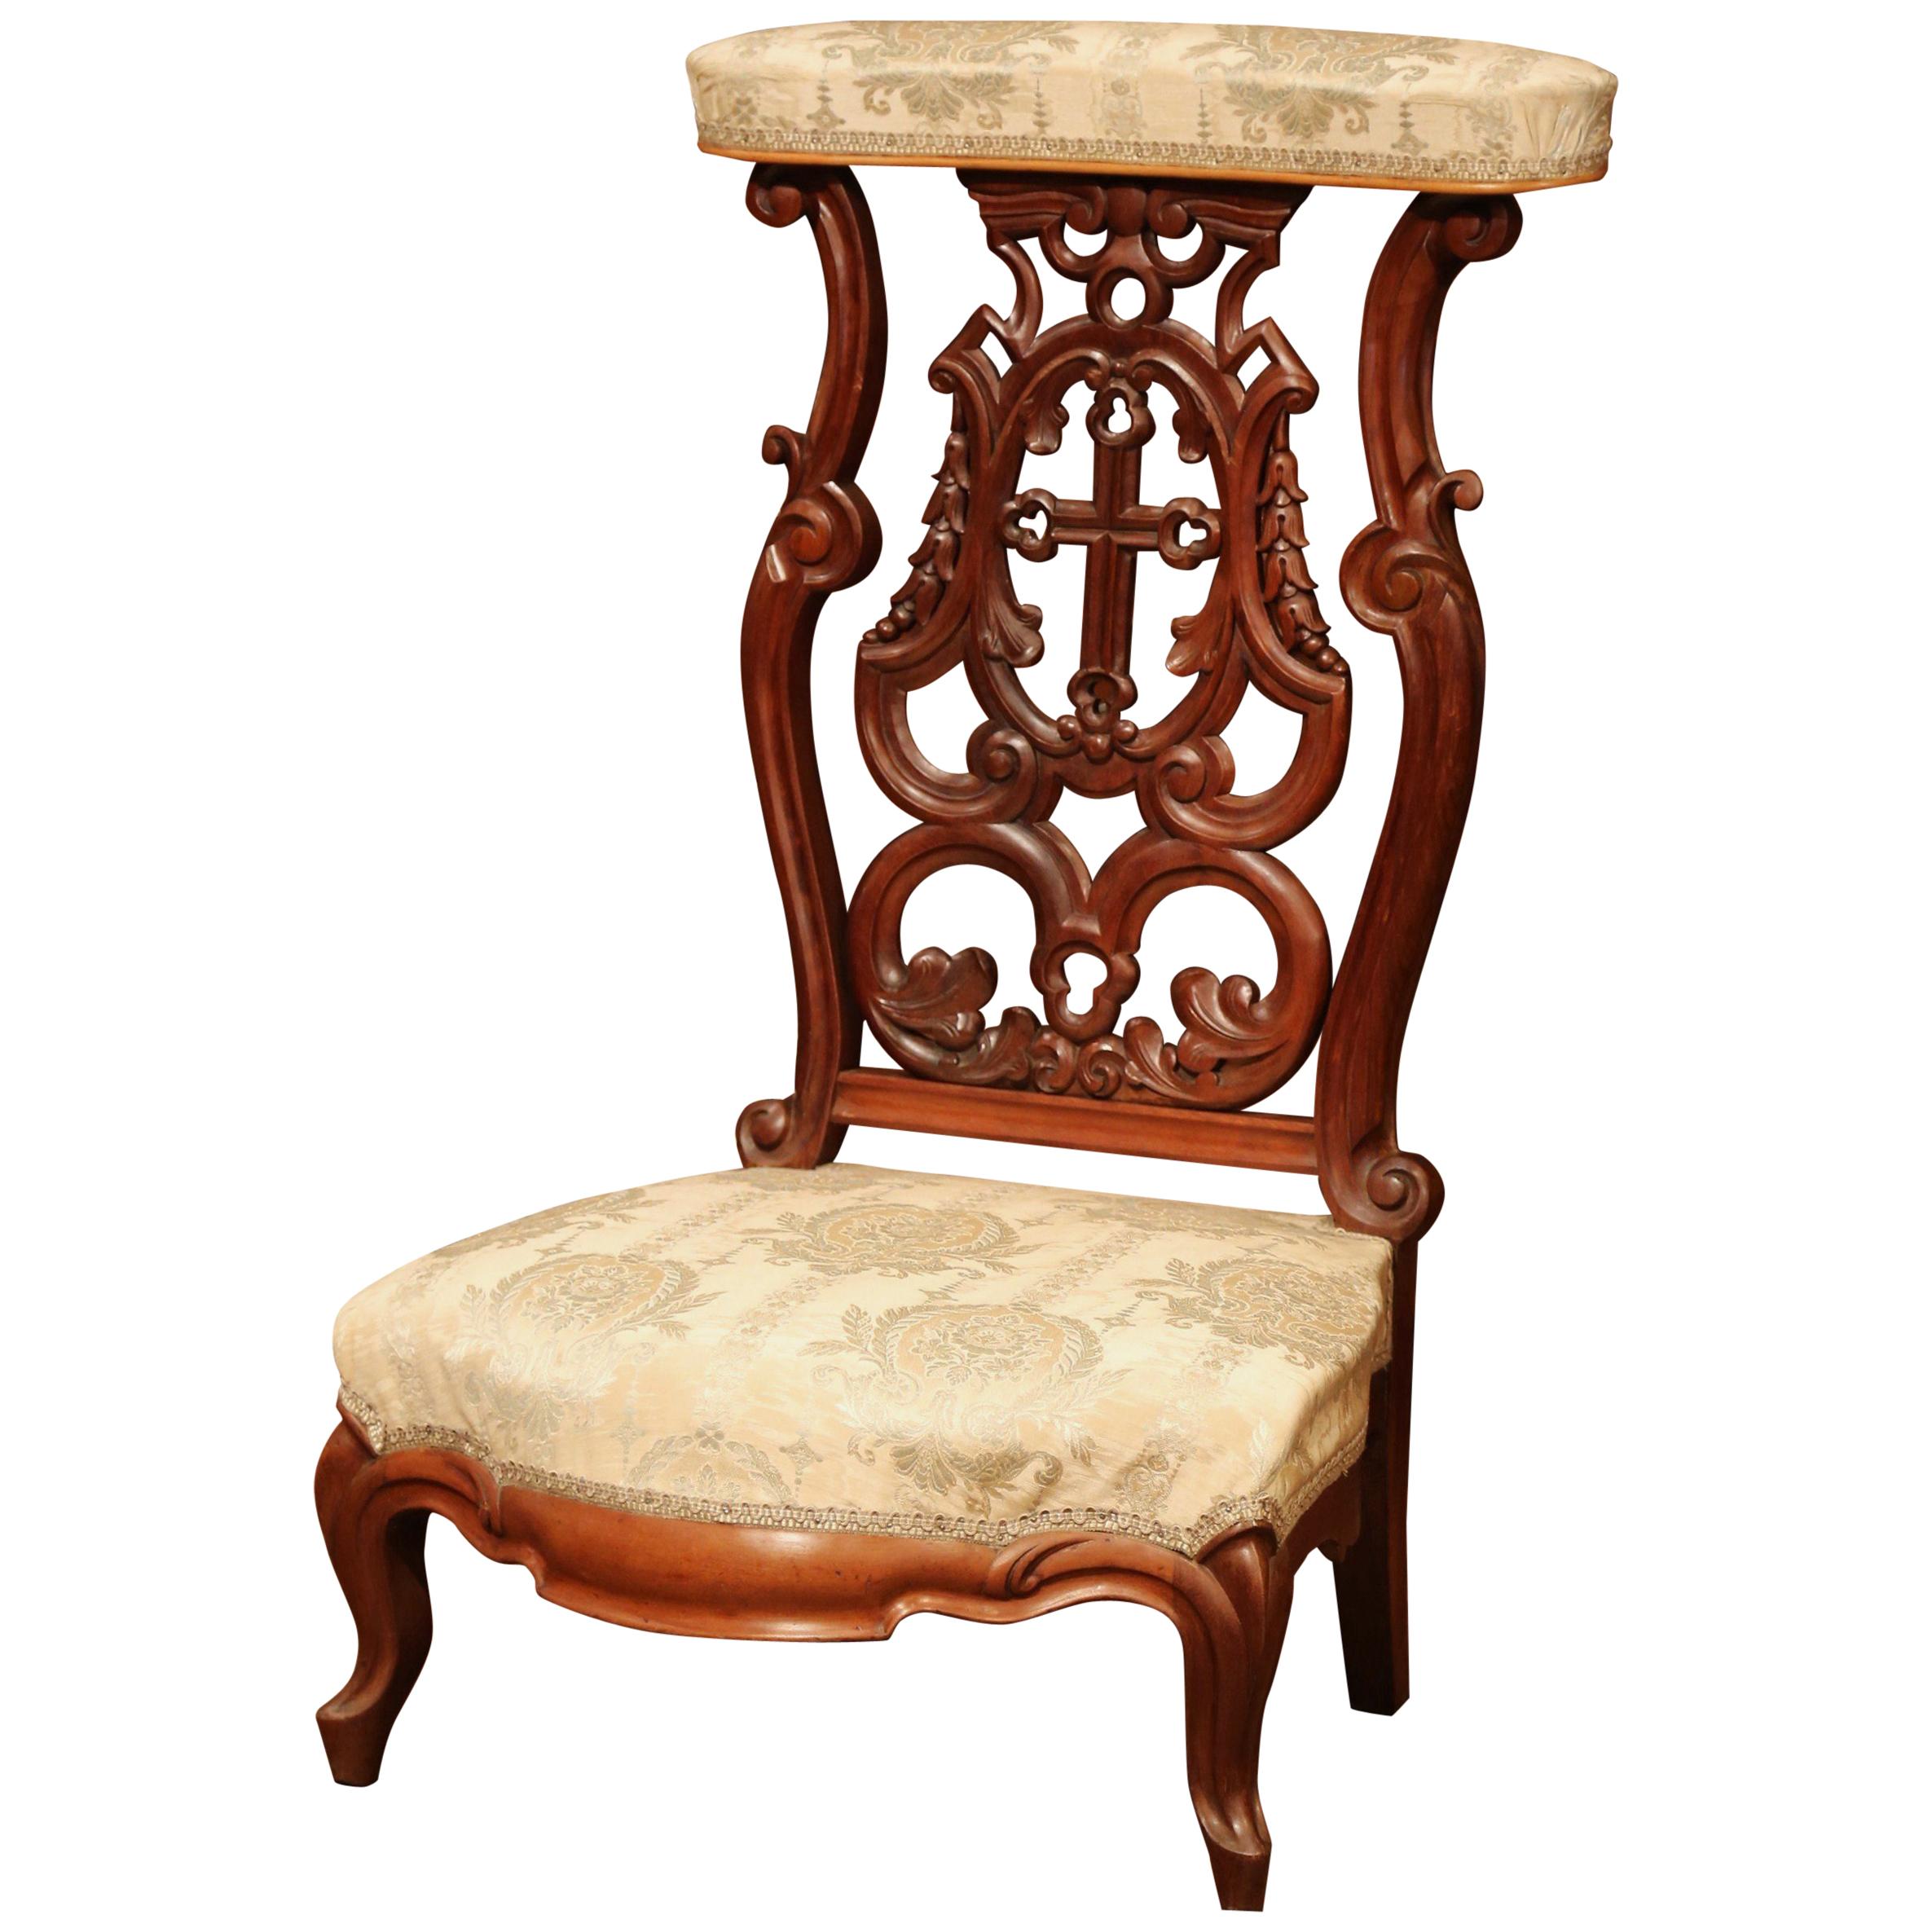 19th Century French Carved Walnut Prayer Bench or "Prie-Dieu" with Silk Fabric